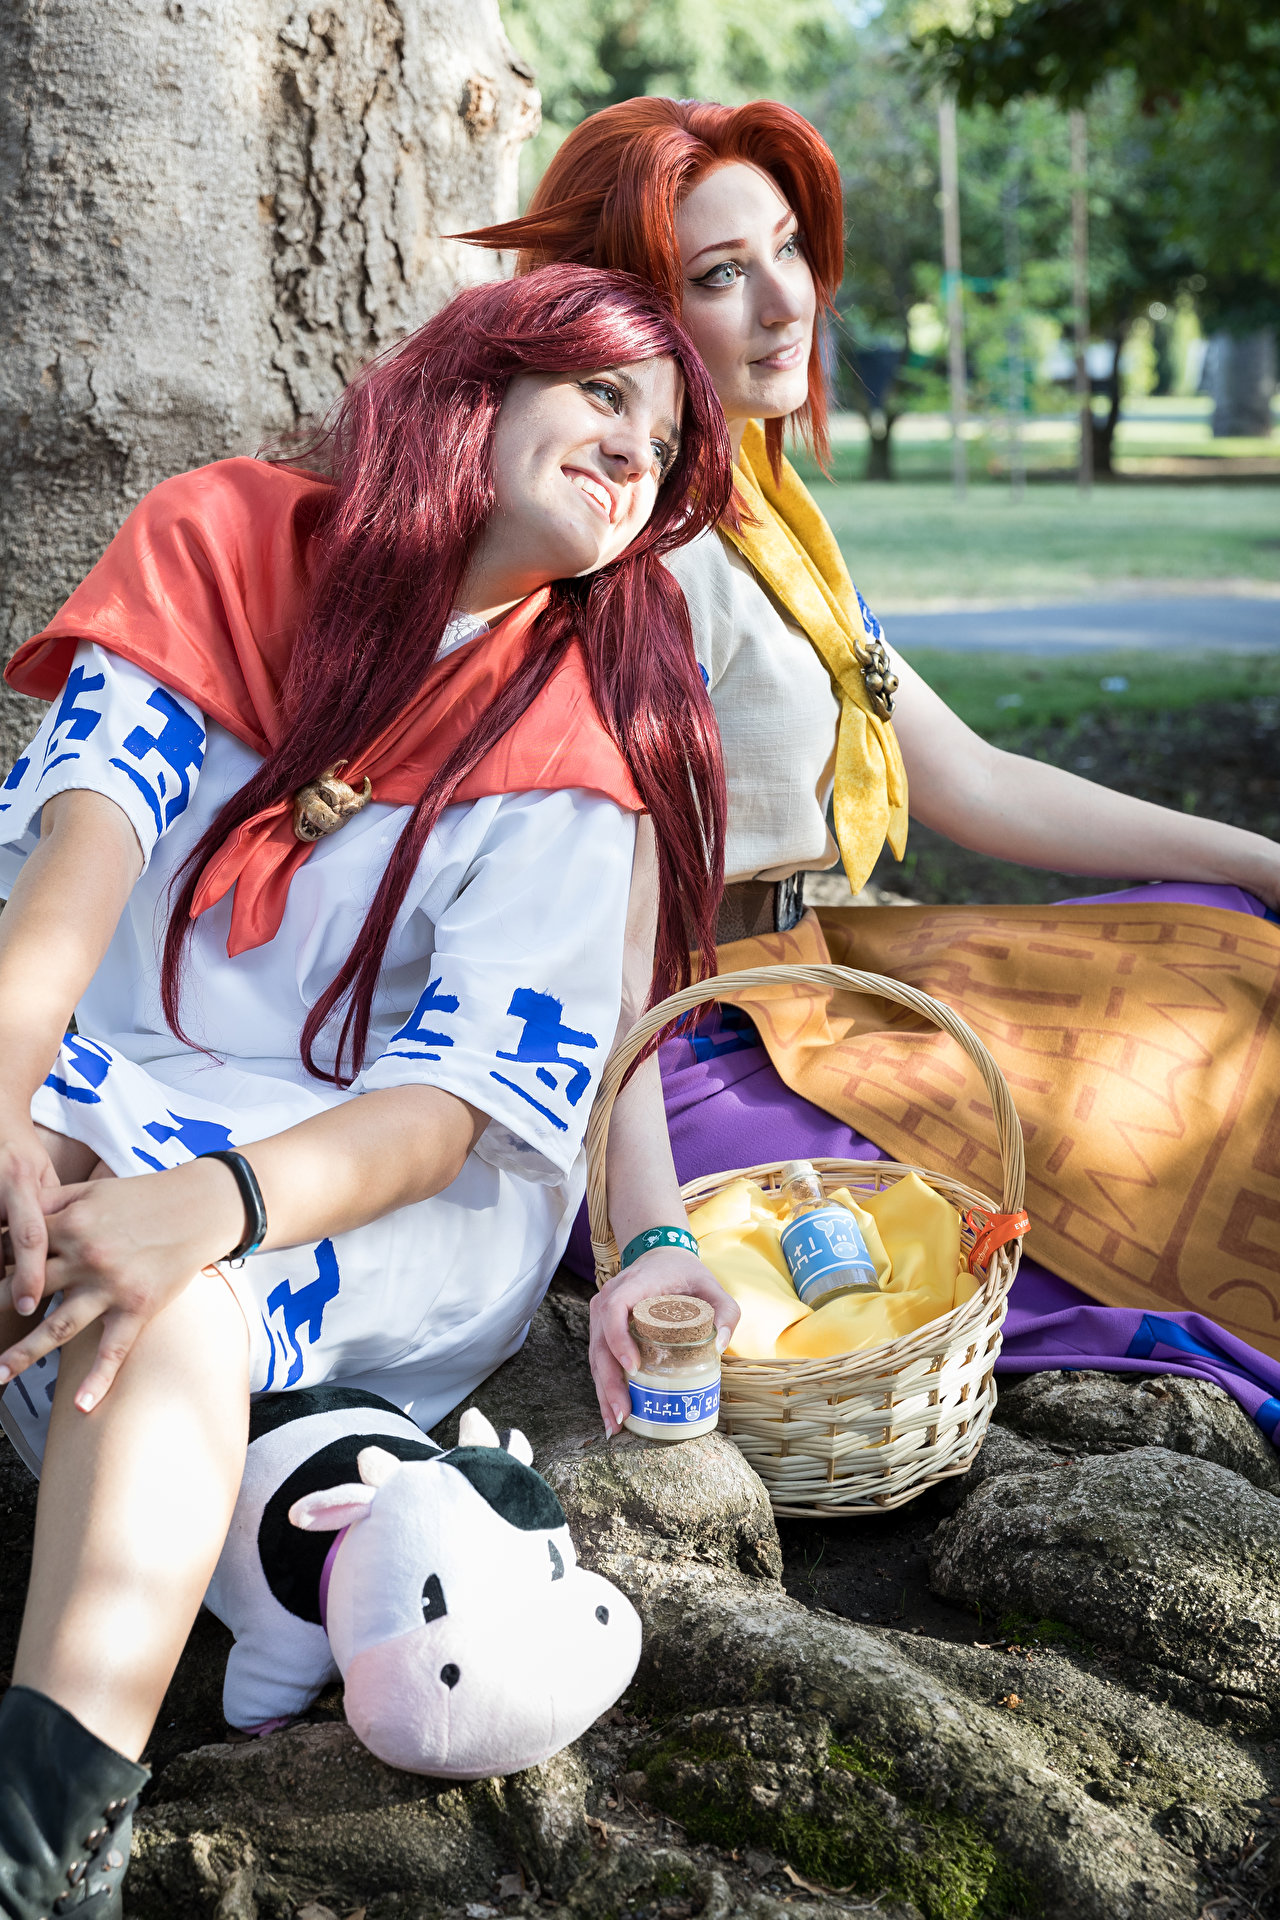 Cospix.net photo featuring Red Fae Cosplay